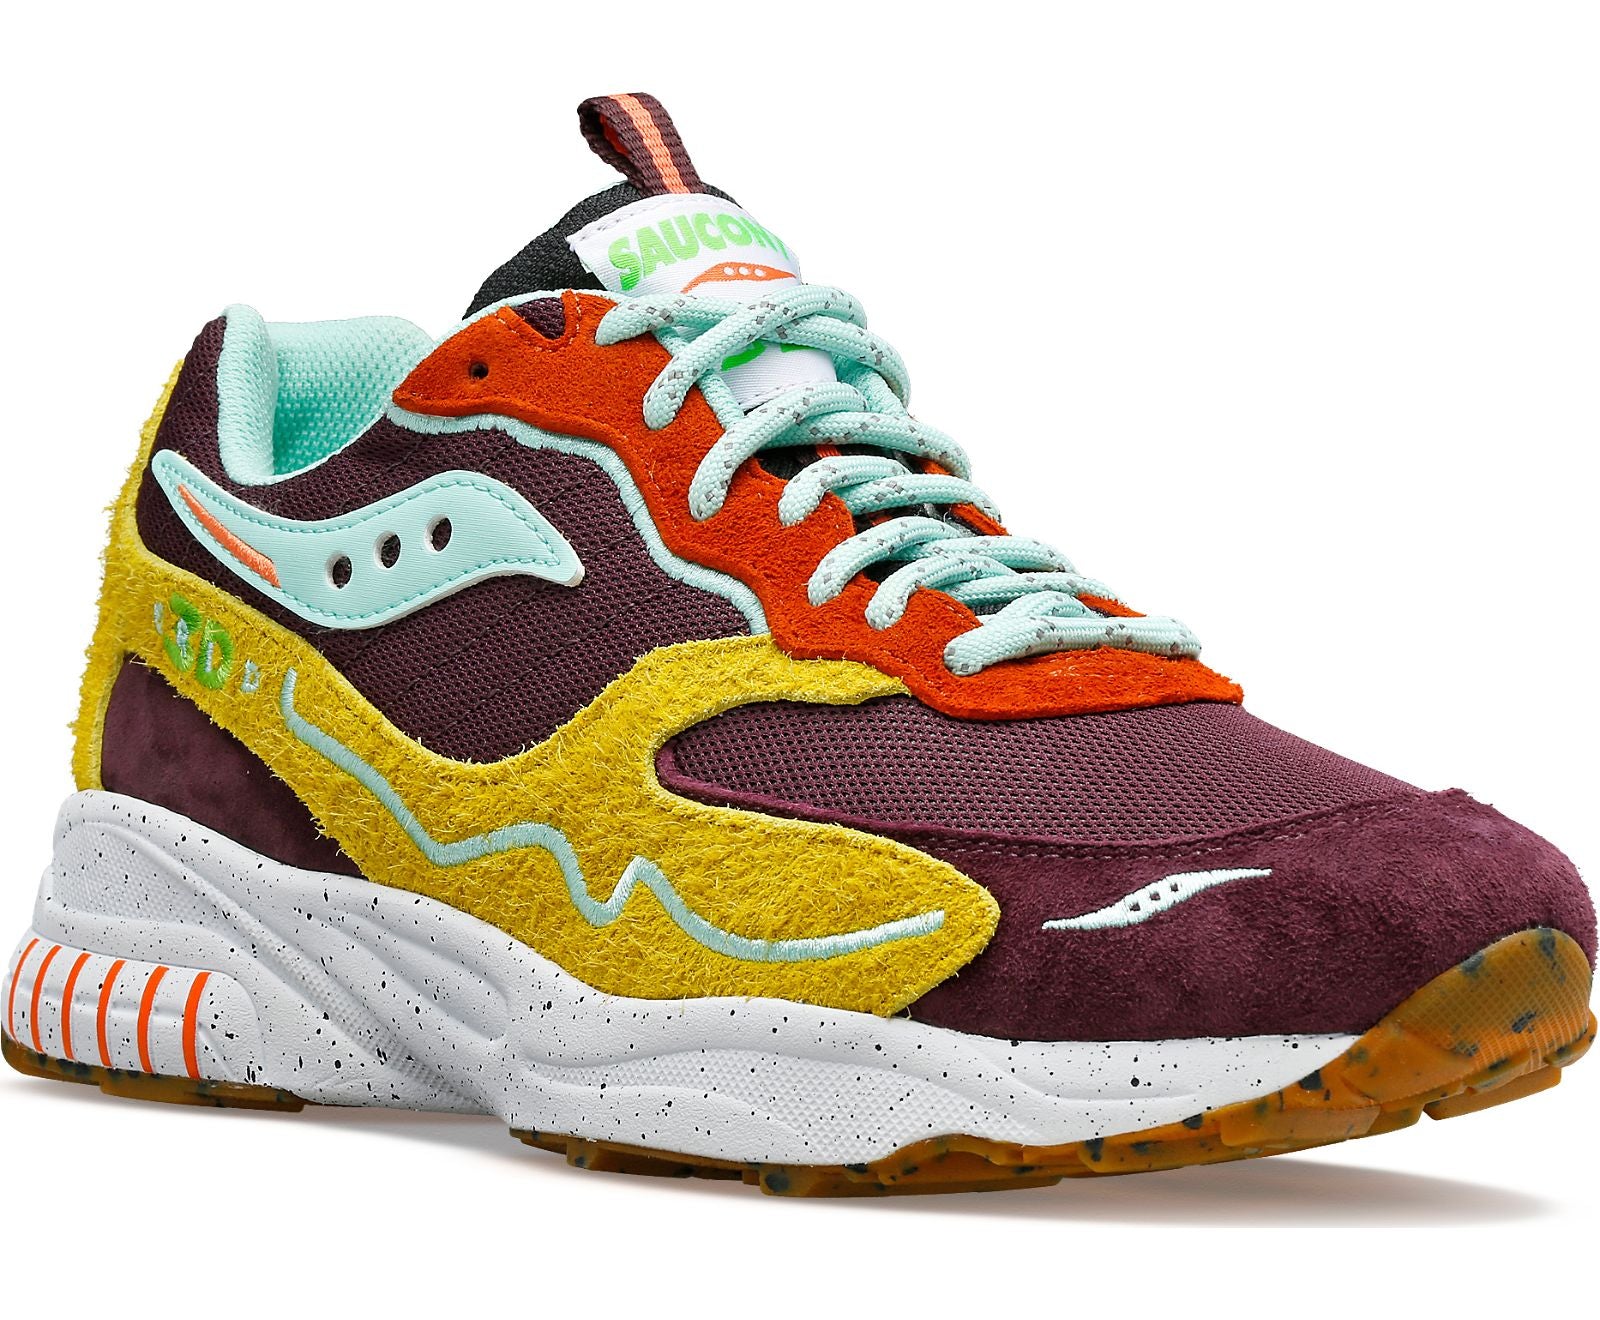 Front angle view of the Men's 3D Grid Hurricane Trailian shoe by Saucony in the color Brown/Mustard